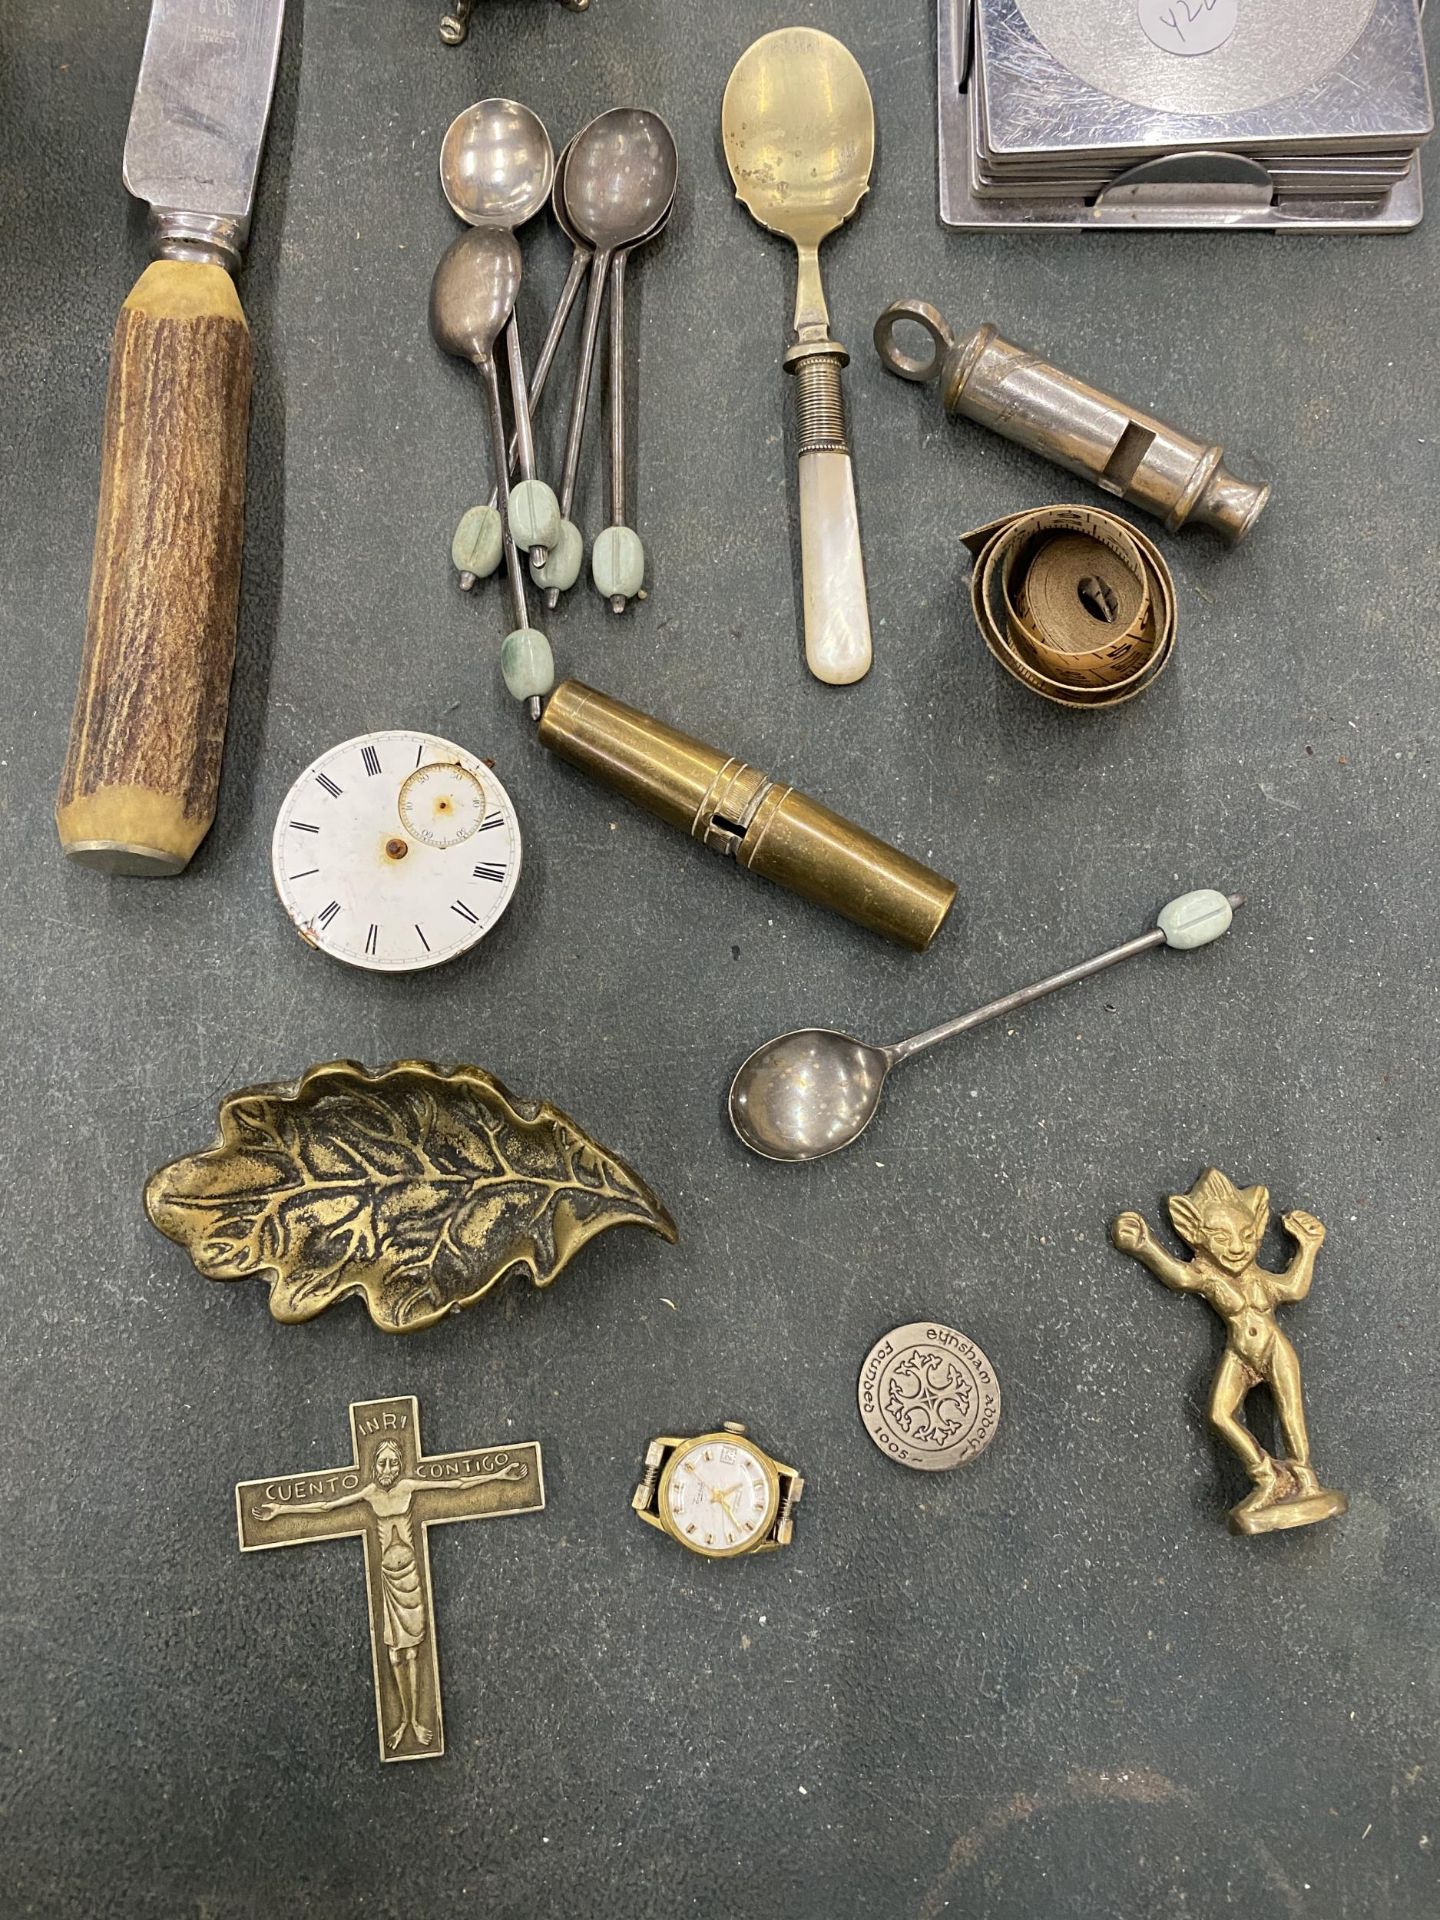 A MIXED LOT TO INCLUDE FLATWARE, COFFEE BEAN SPOONS, BRASS ITEMS, A POLICE WHISTLE, ETC - Image 2 of 5